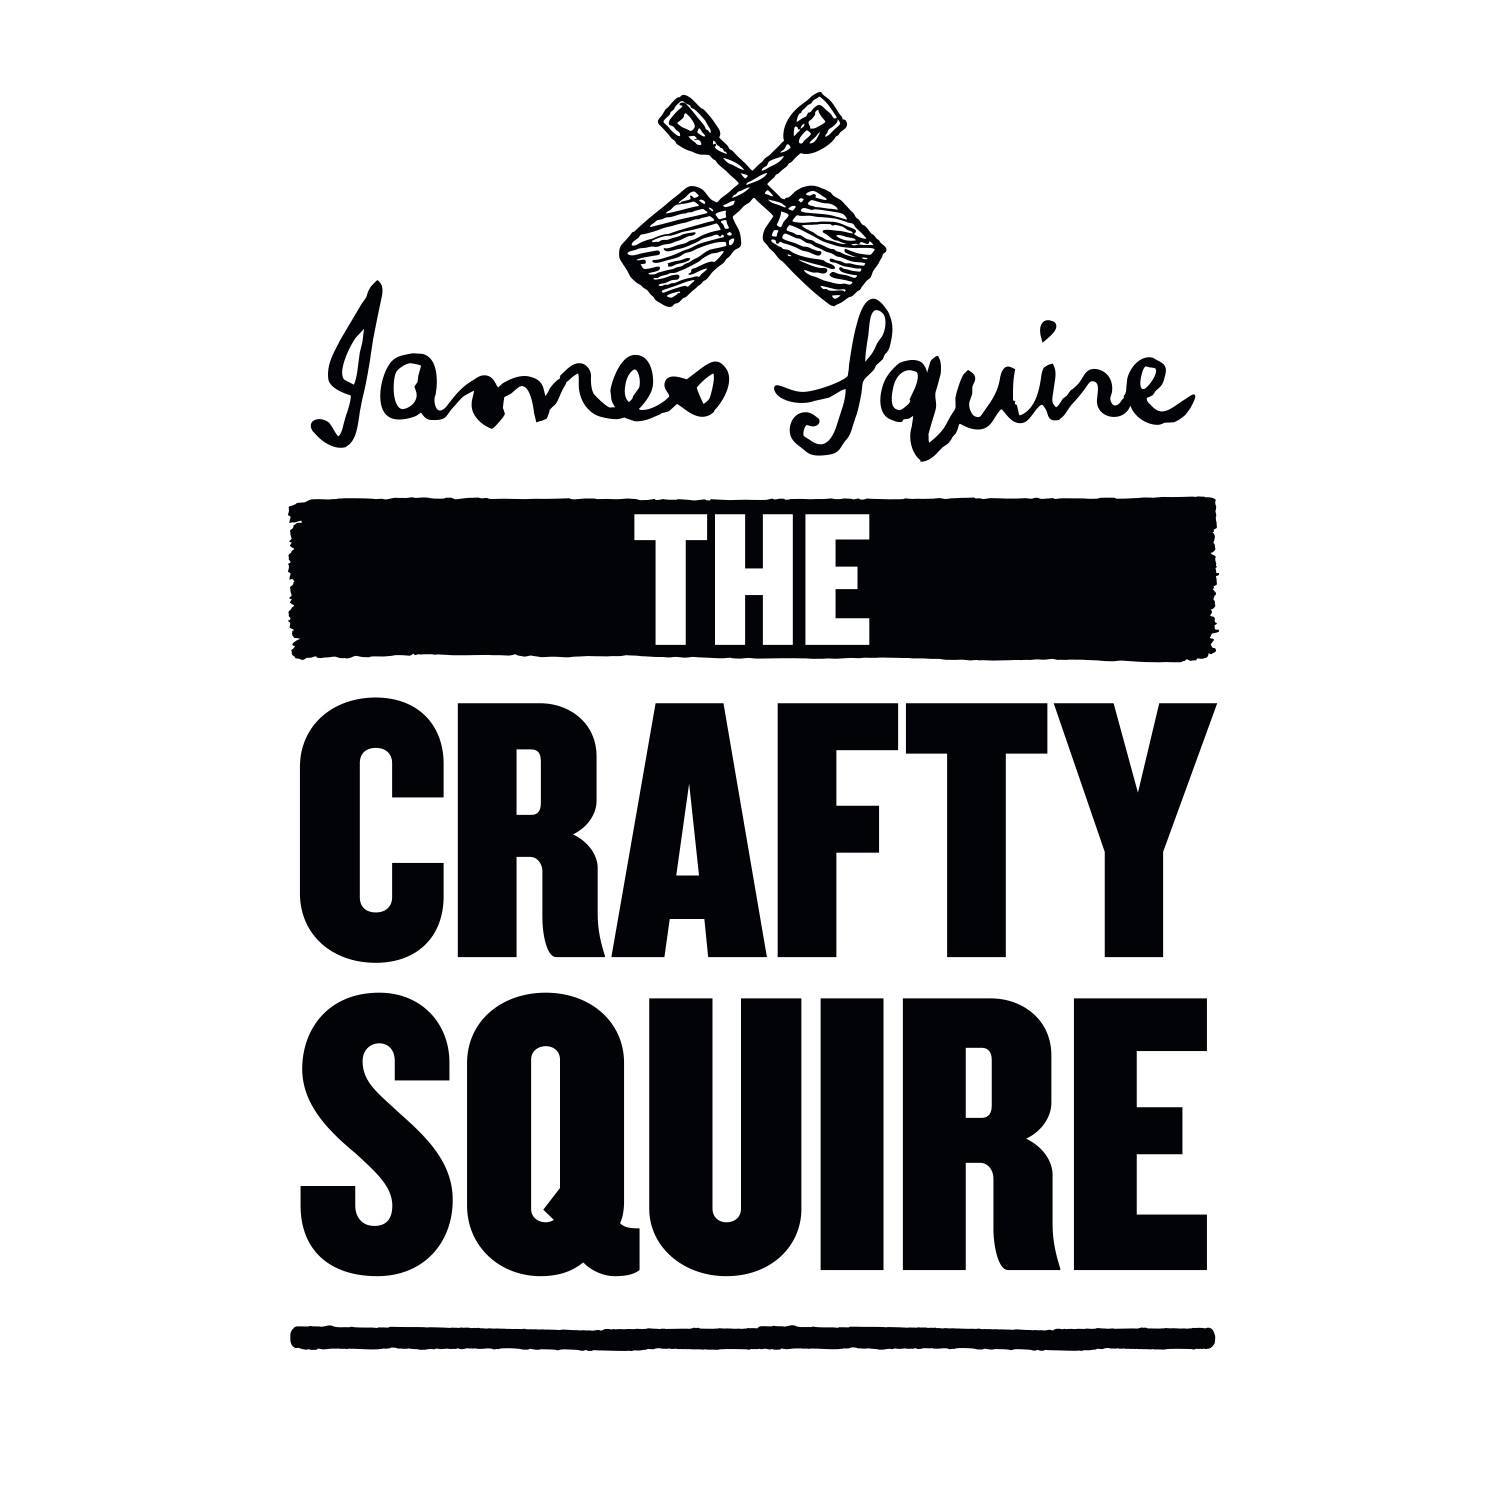 The Crafty Squire